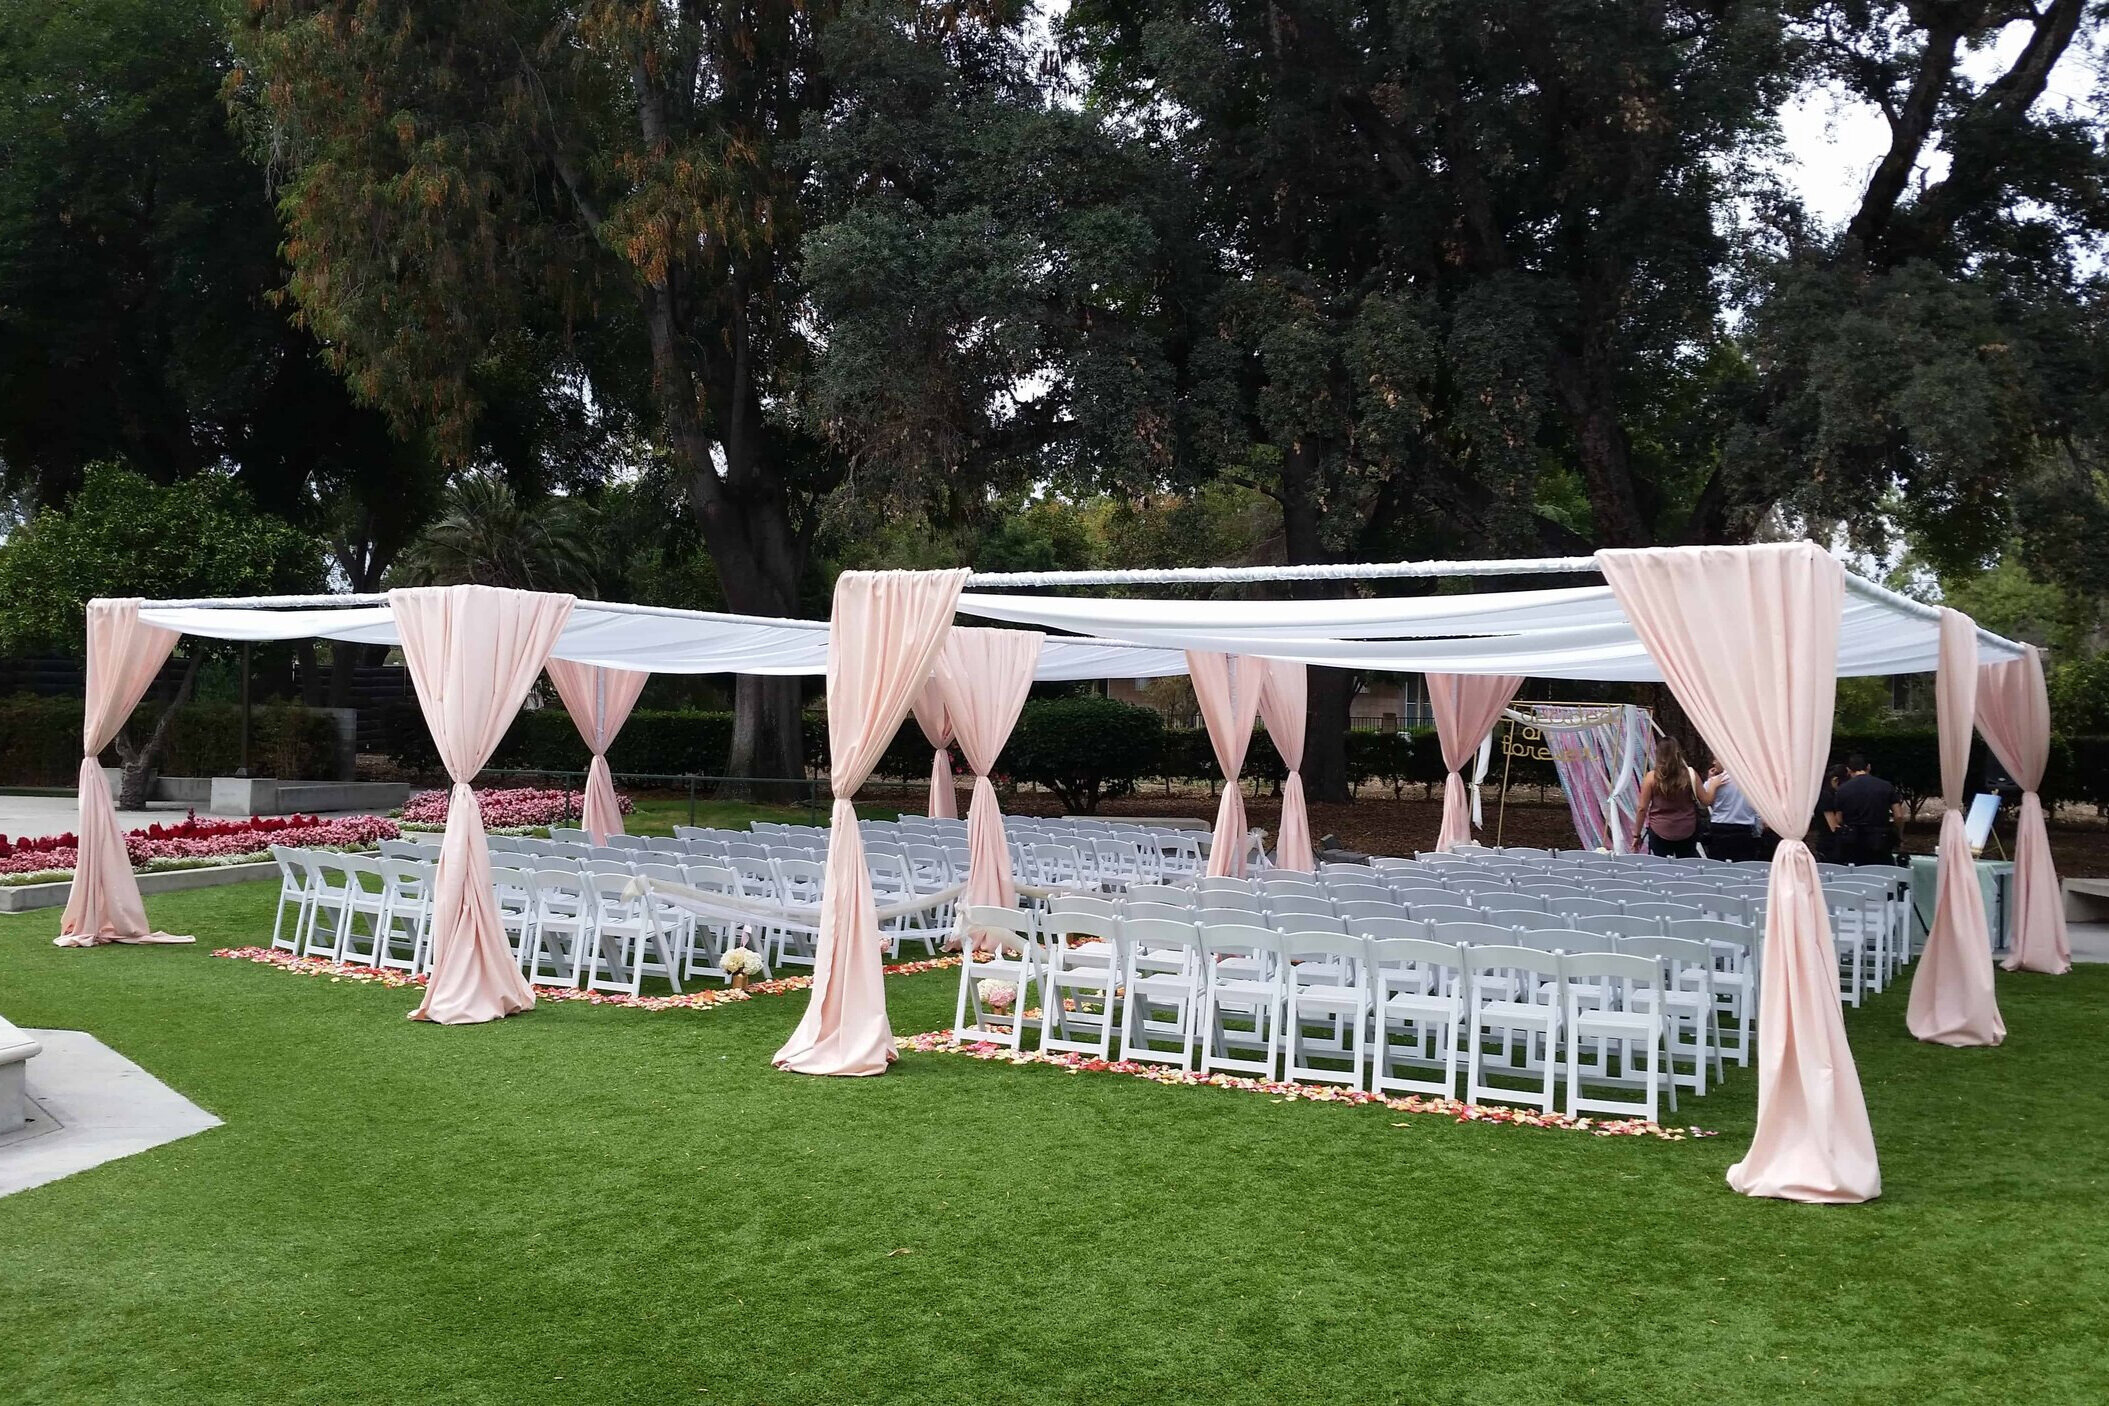 Tents - Company Picnic & Corporate Event Planners - Riverside, Orange County,  Los Angeles